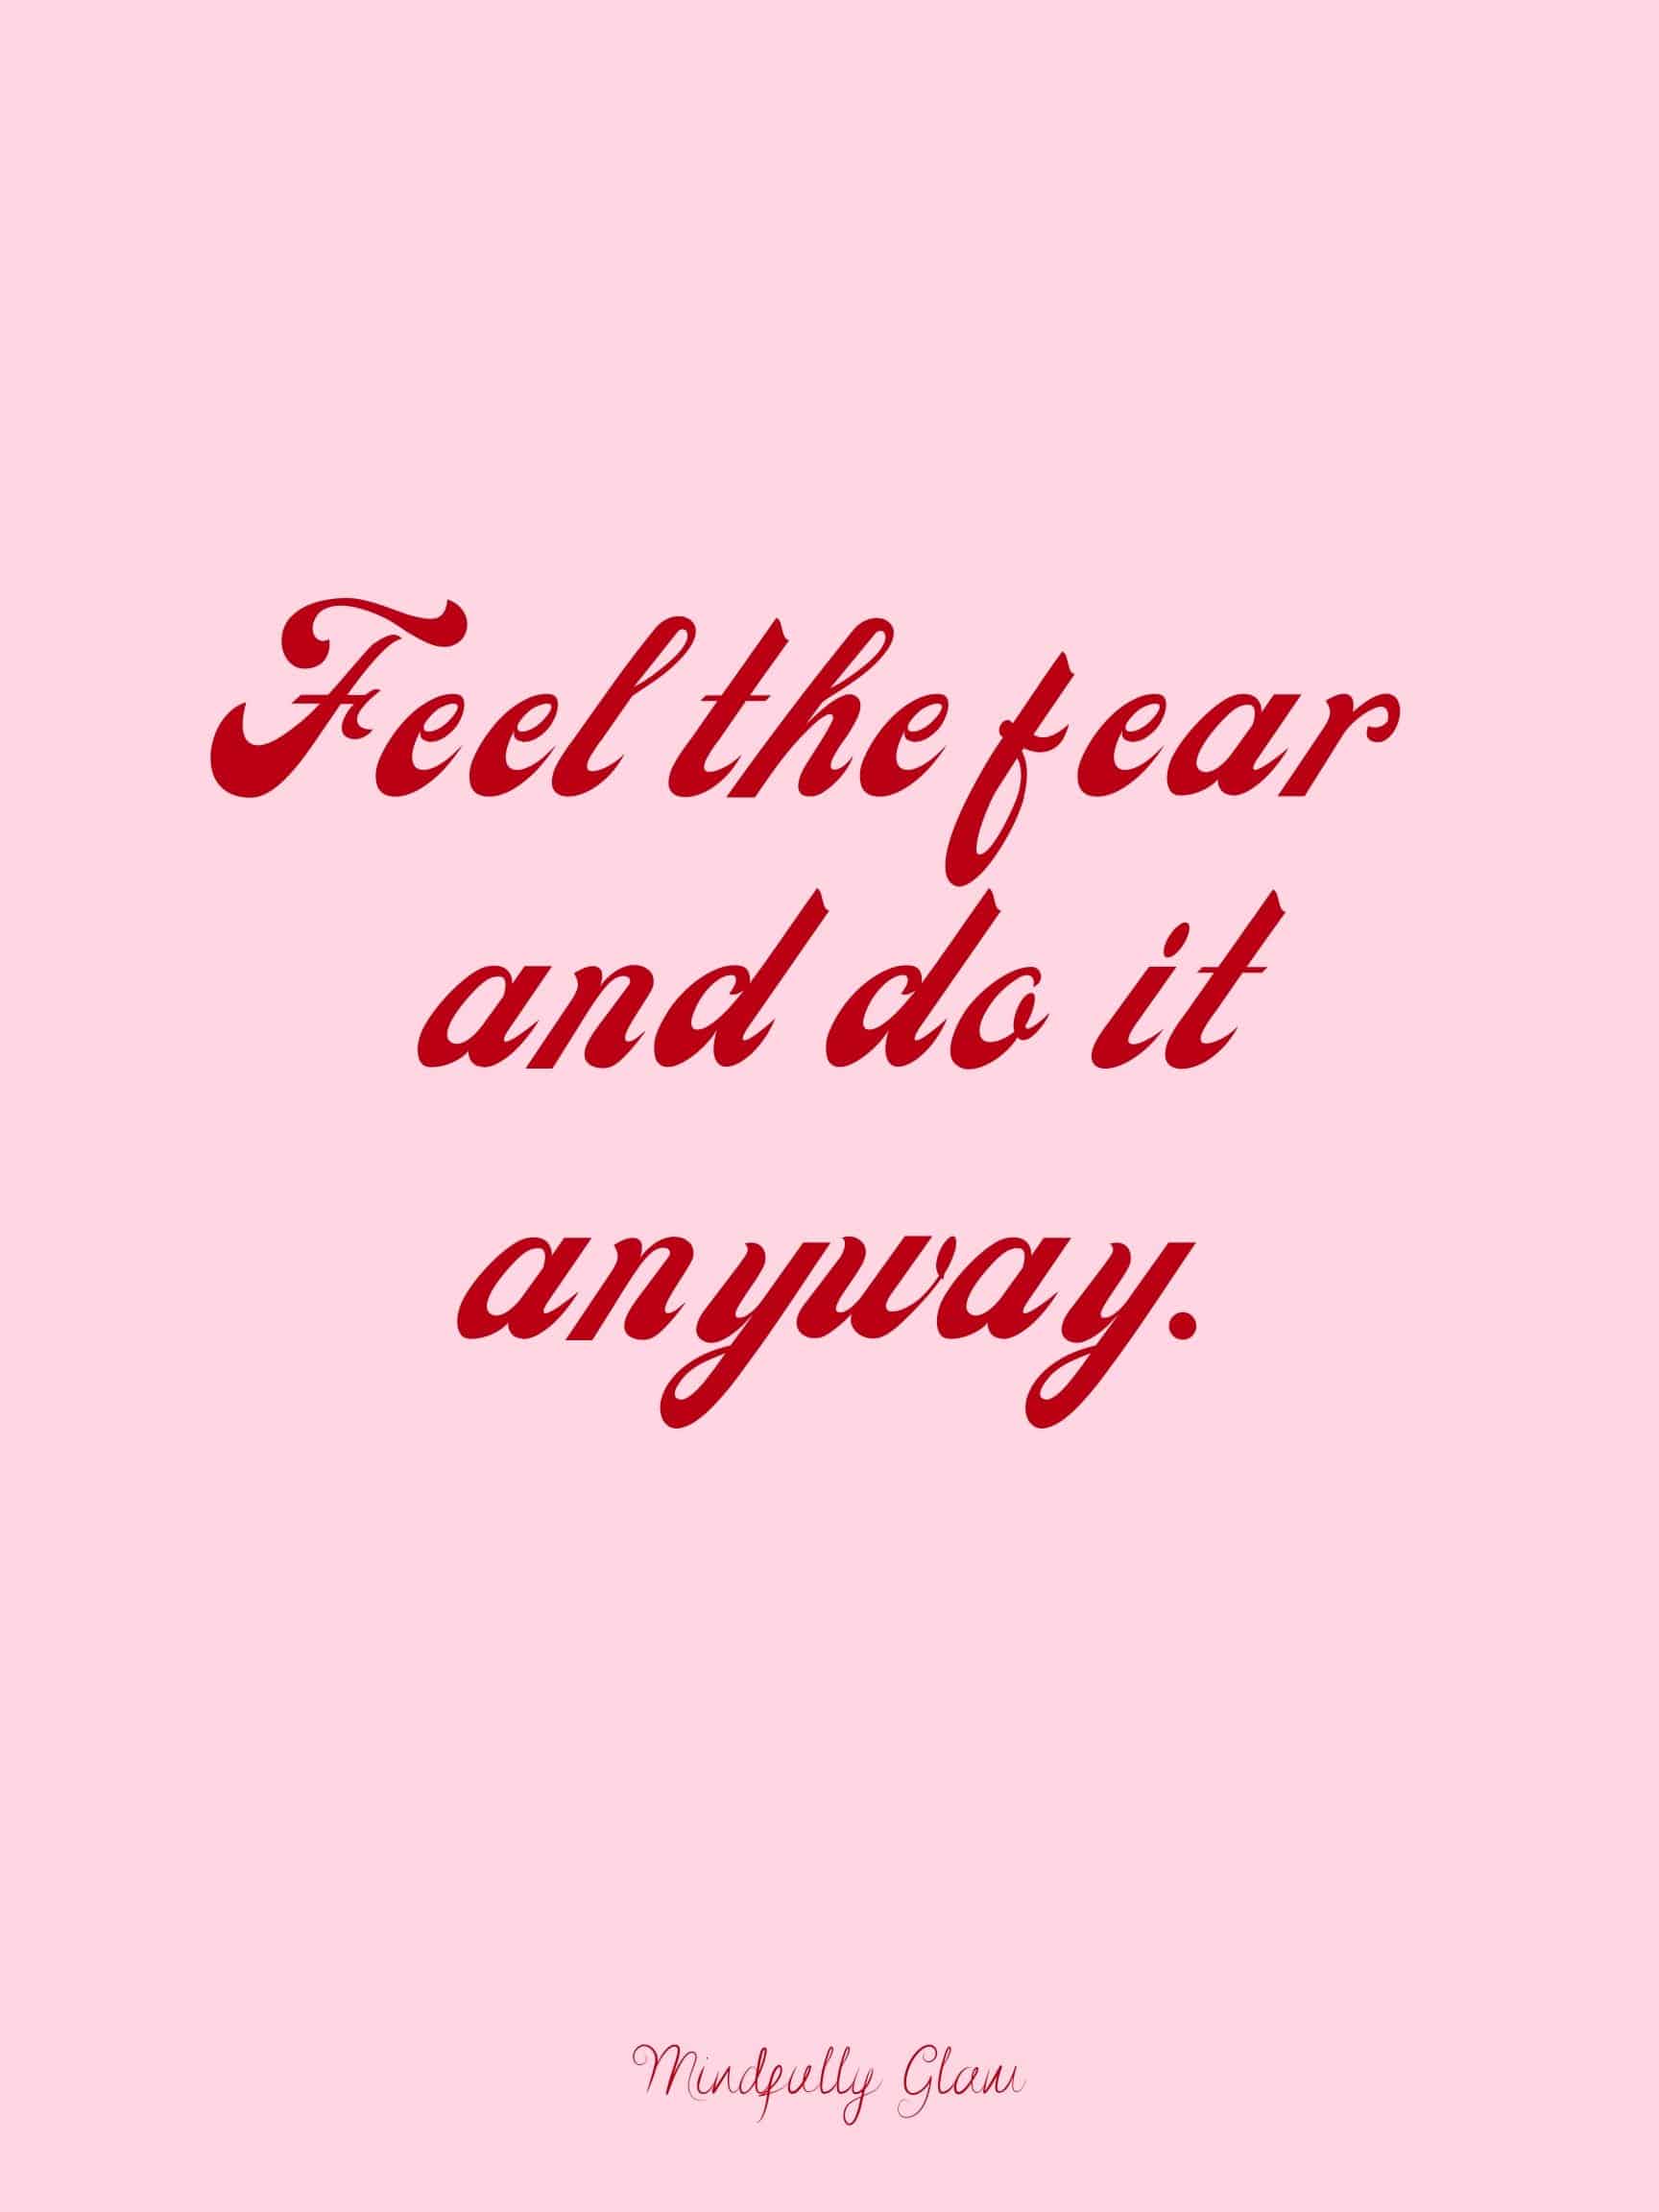 facing fear images